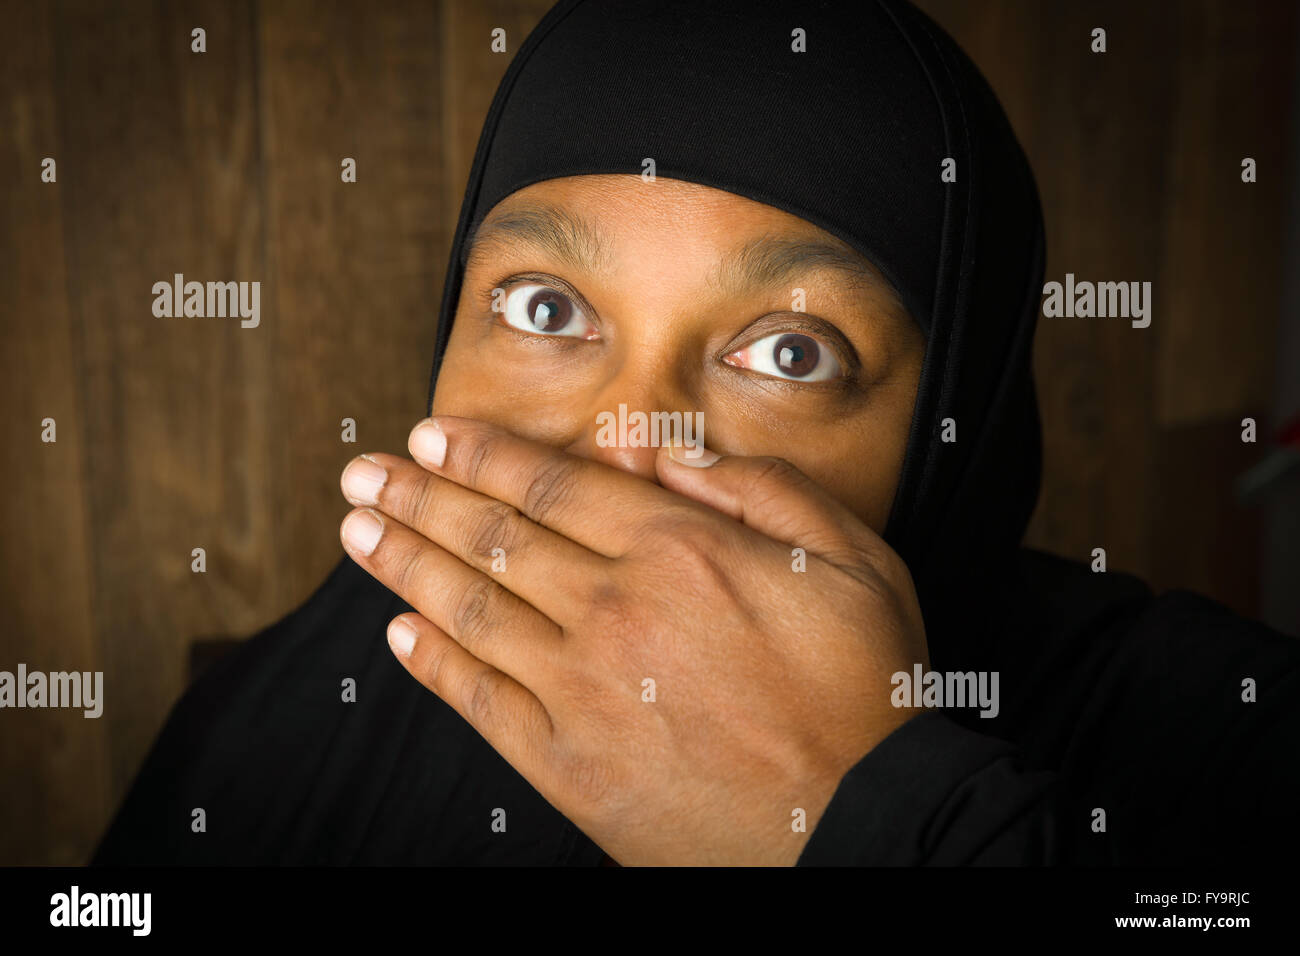 Muslim woman of African descent holding her hand in front of her mouth Stock Photo